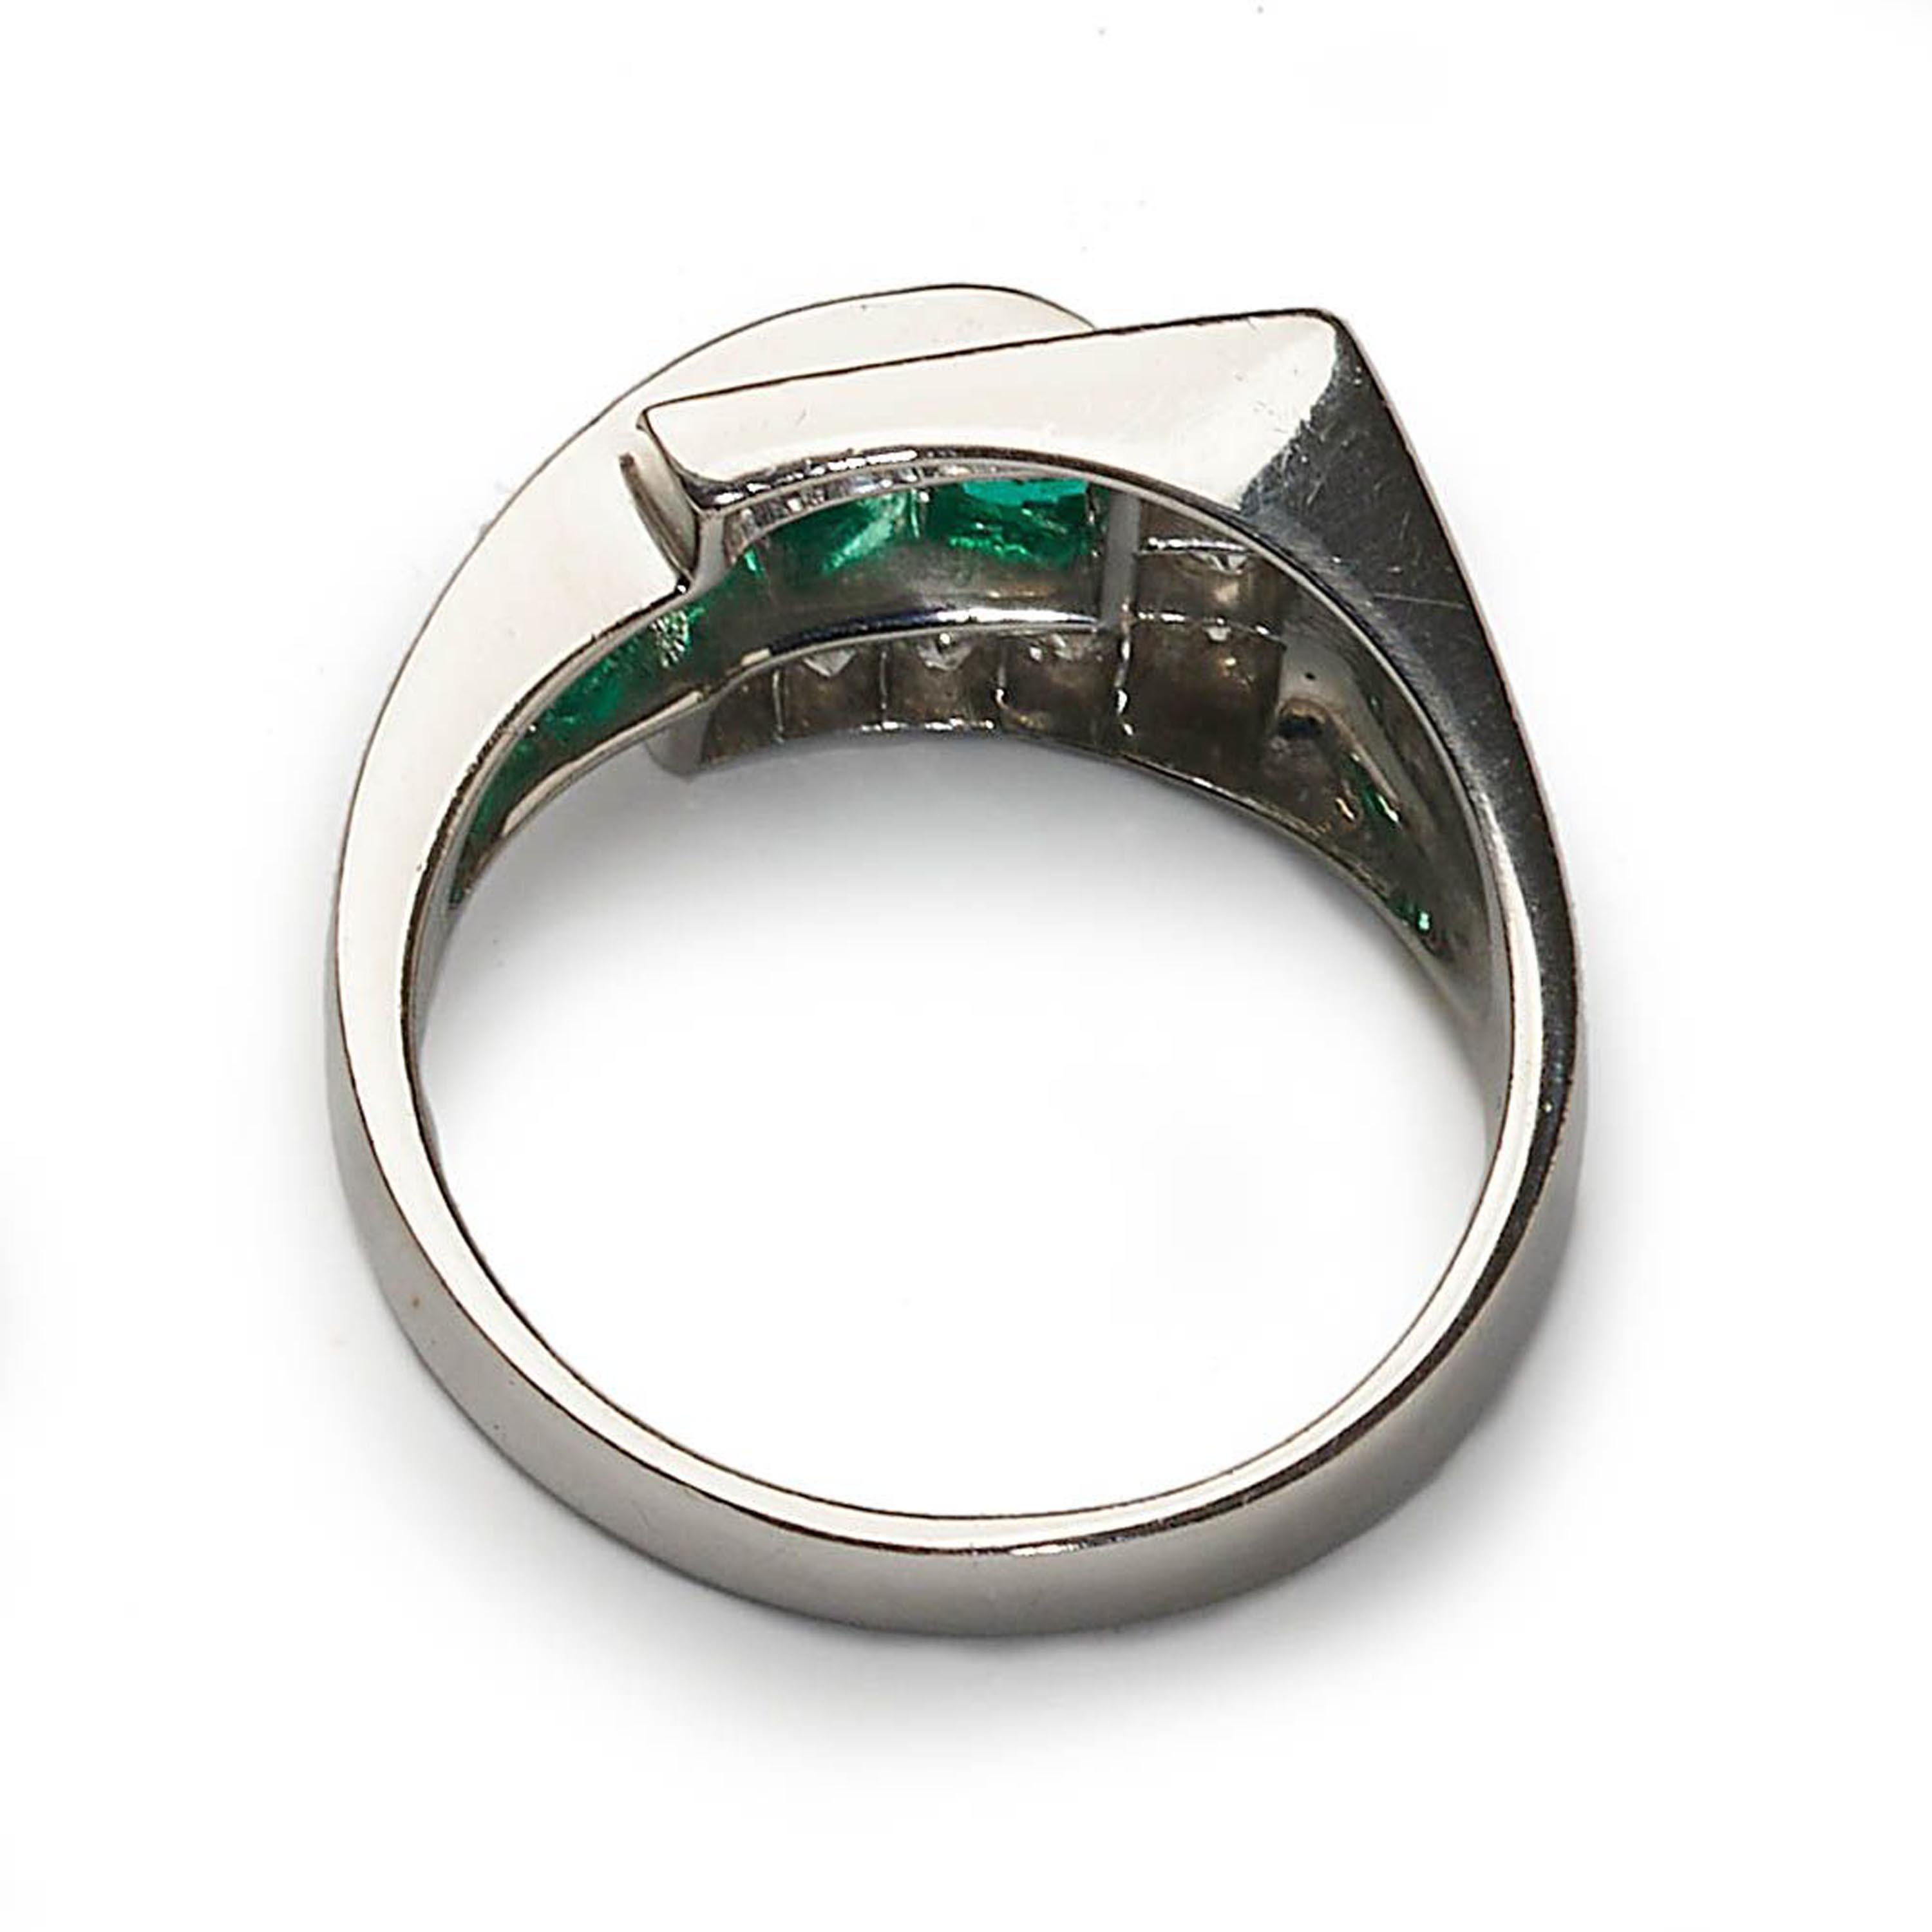 Baguette Cut Vintage Tiffany & Co. Emerald, Diamond and Platinum Tank Ring, Dated 1940 For Sale